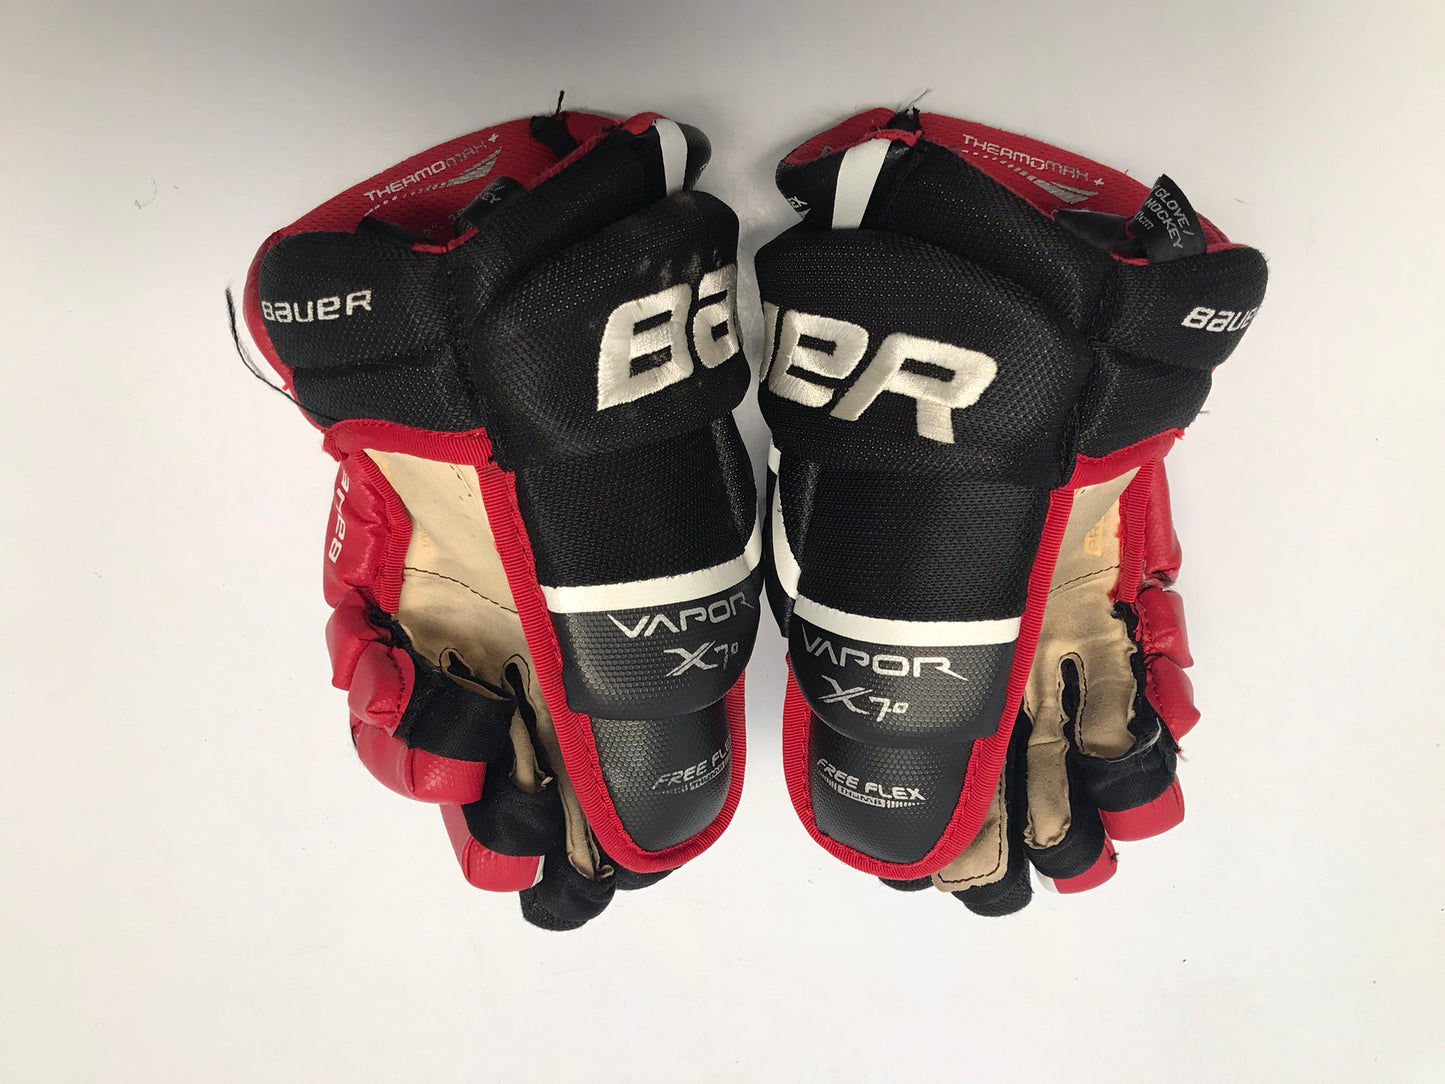 Hockey Gloves Child Size 12 inch Junior Bauer Vapor X 70 Black Red Like New Outstanding Quality